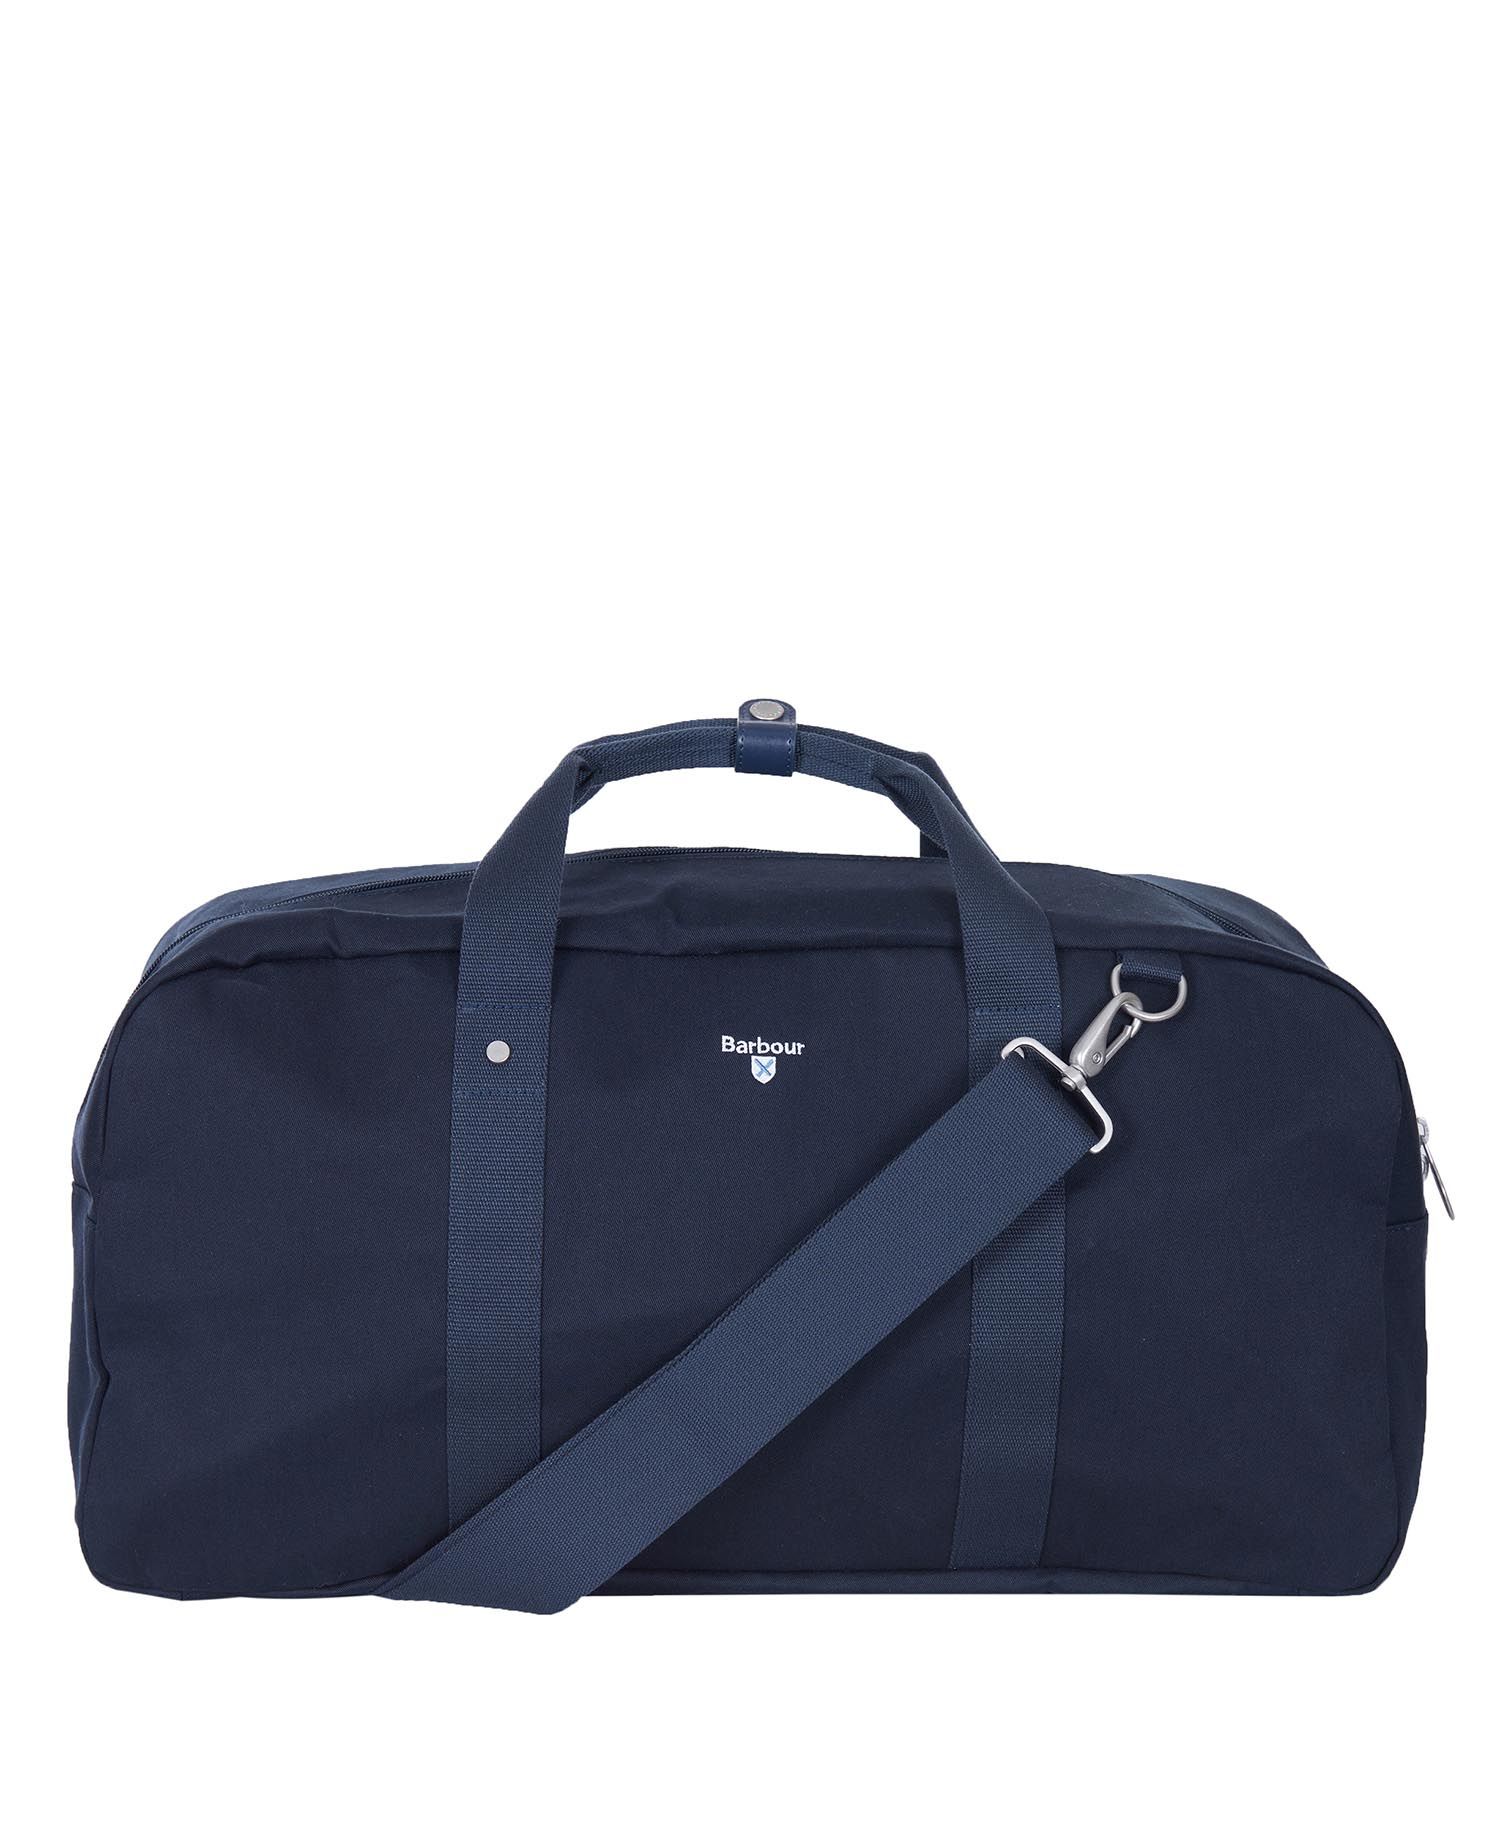 Barbour Cascade Holdall in Navy | Barbour